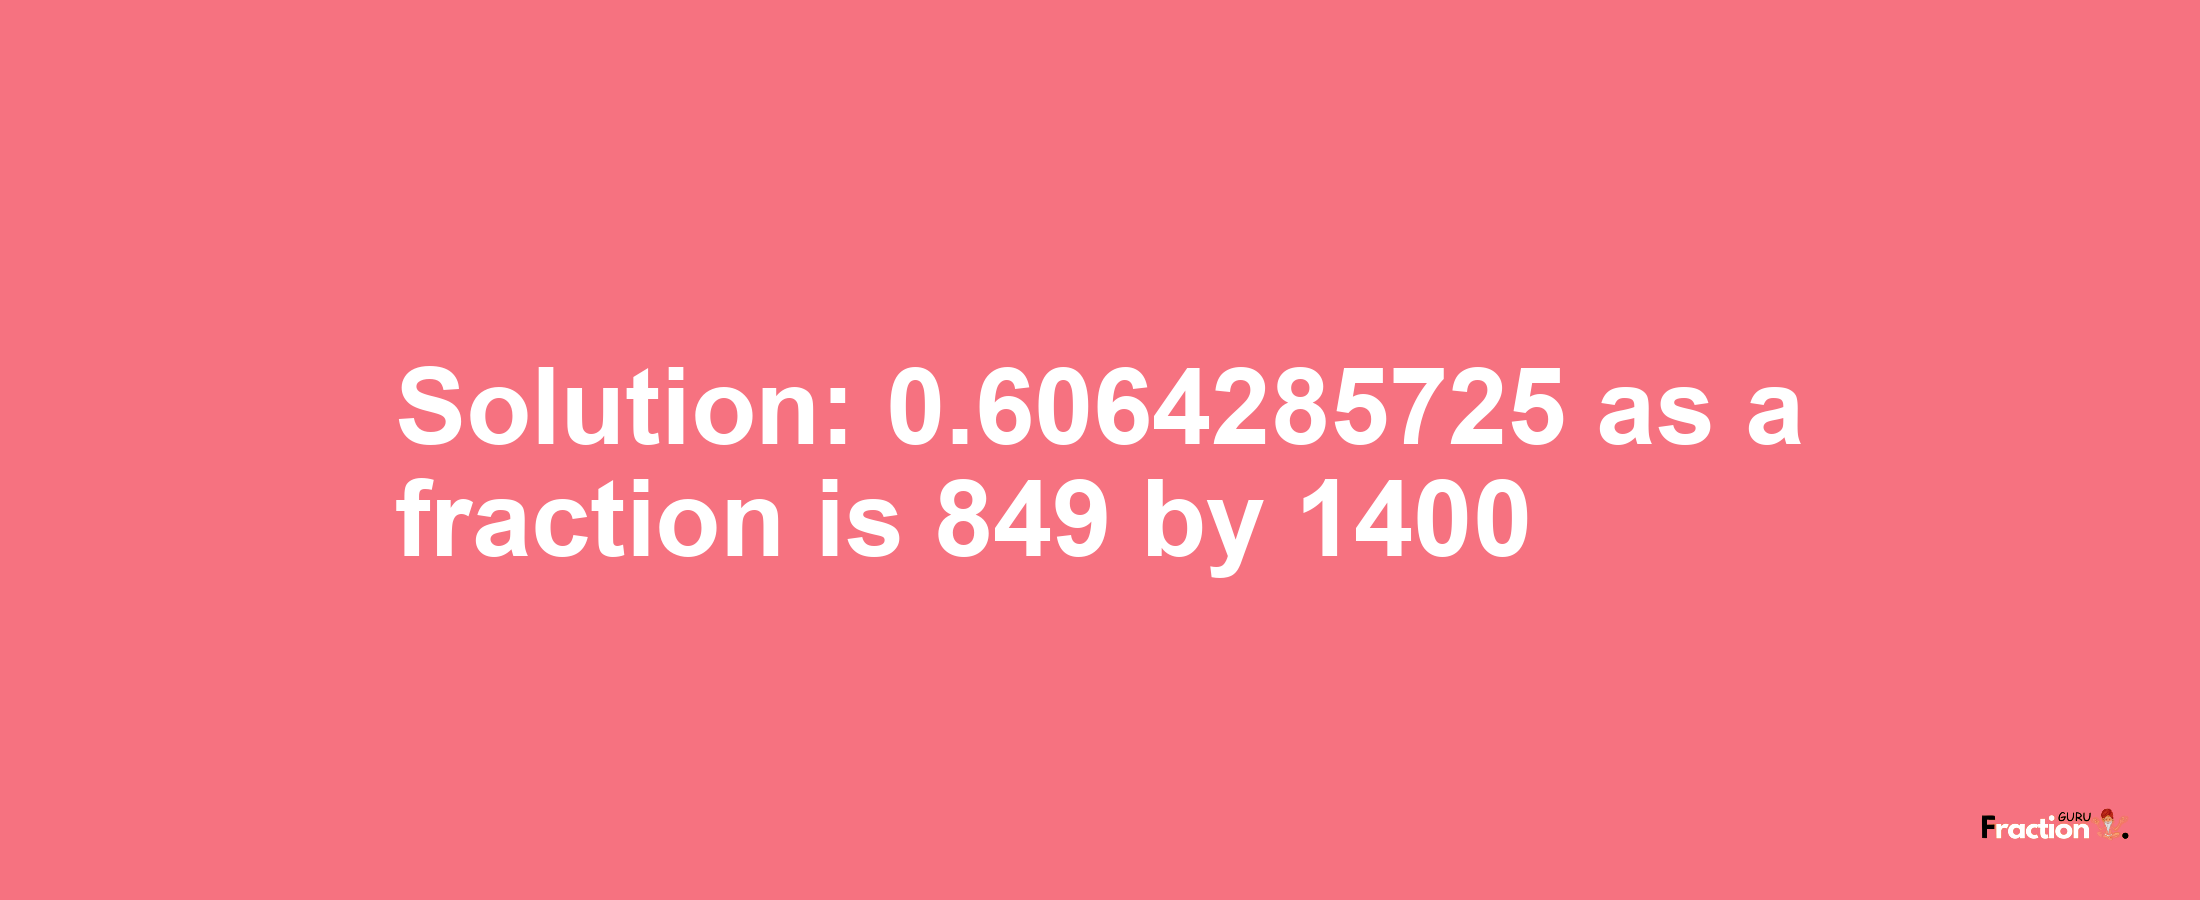 Solution:0.6064285725 as a fraction is 849/1400